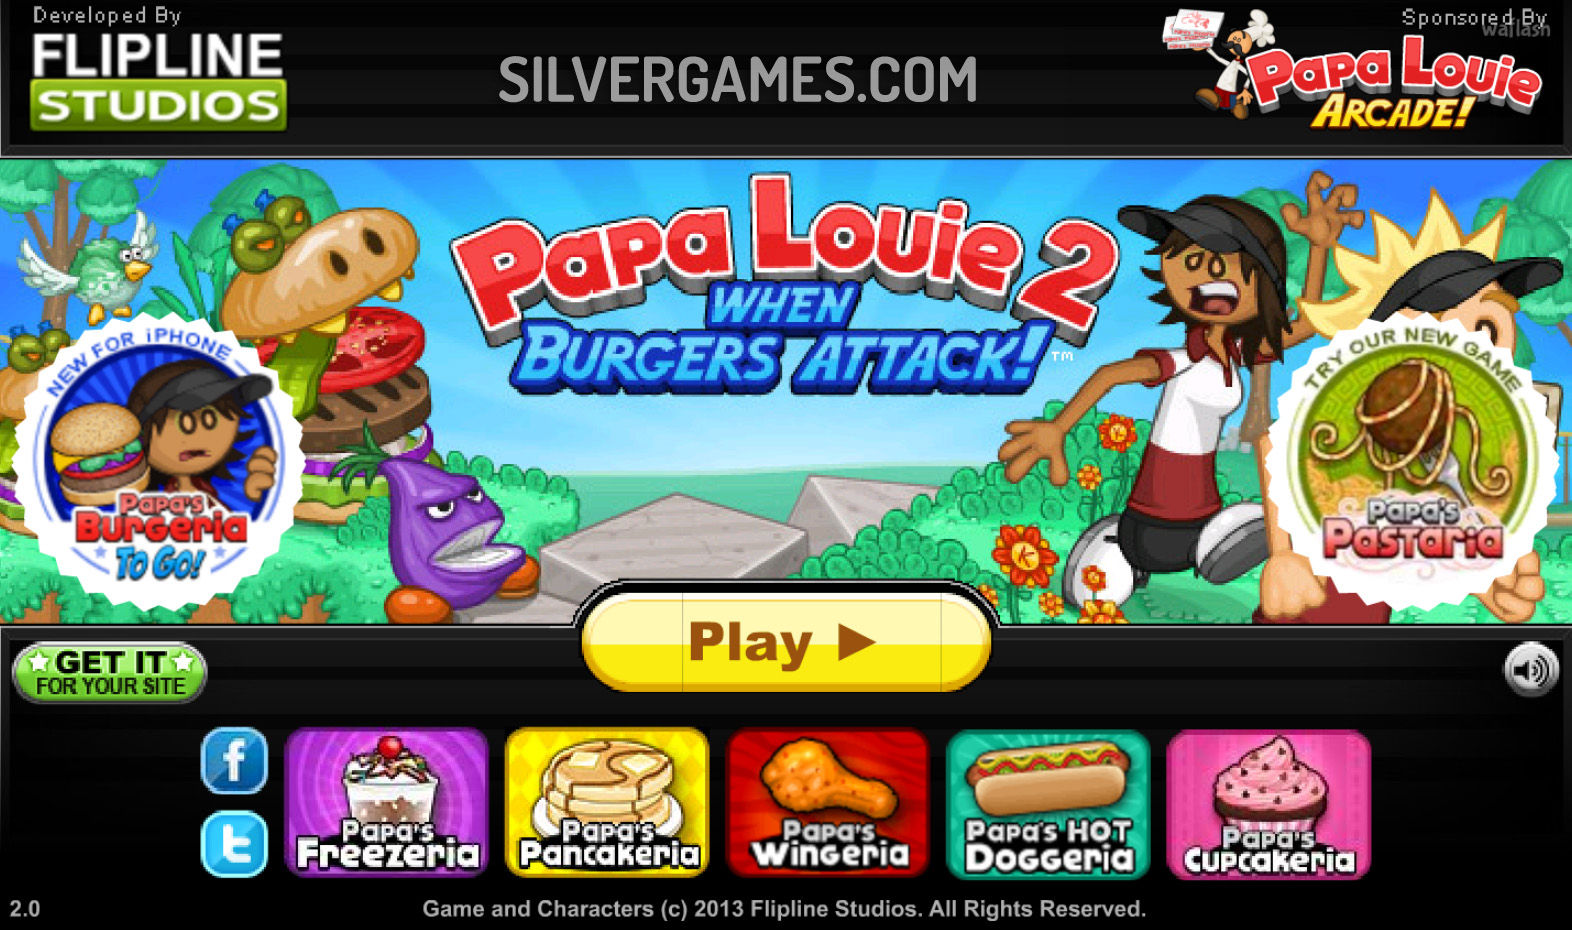 Papa Louie: When Pizzas Attack - 🕹️ Online Game